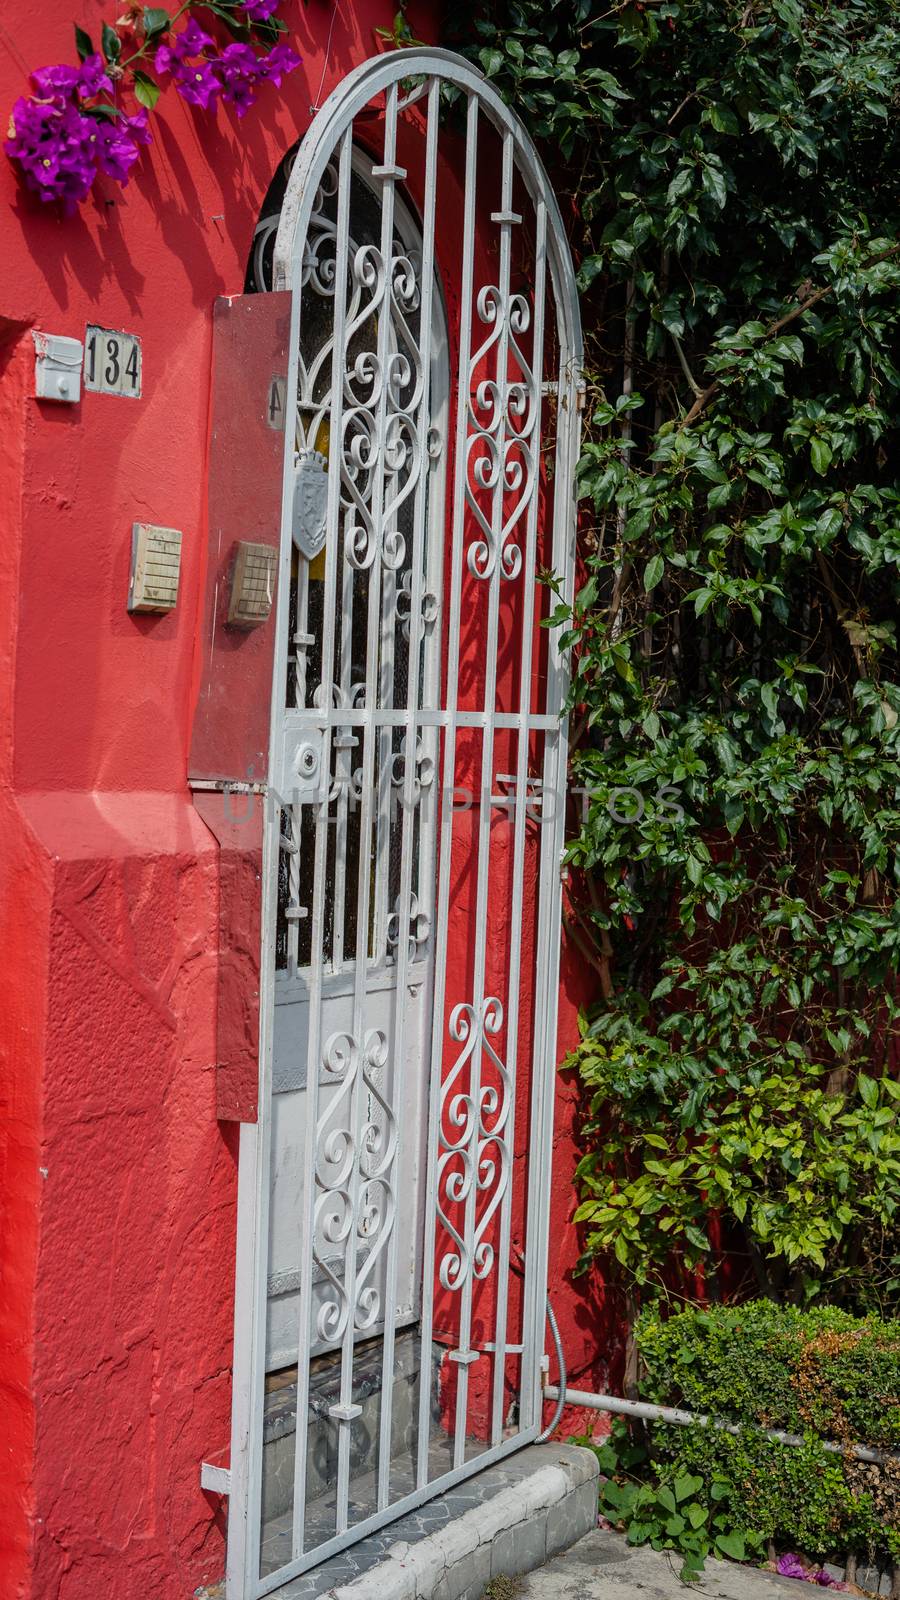 Portrait style picture of a lattice door next to some plants and bushes from a red house